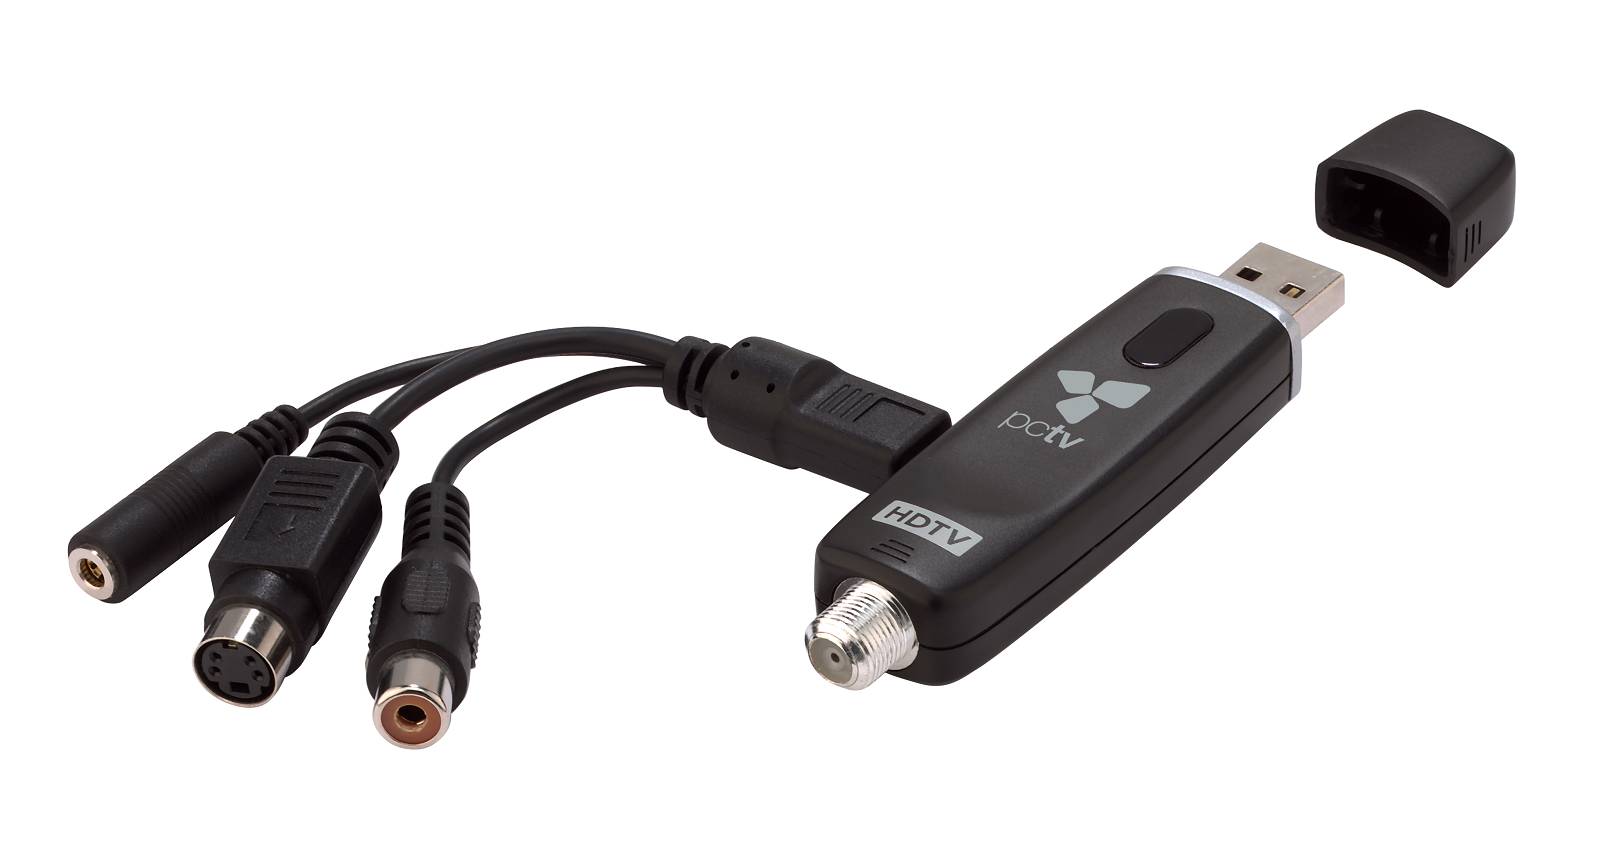 PCTV HD Pro Stick with A/V cable